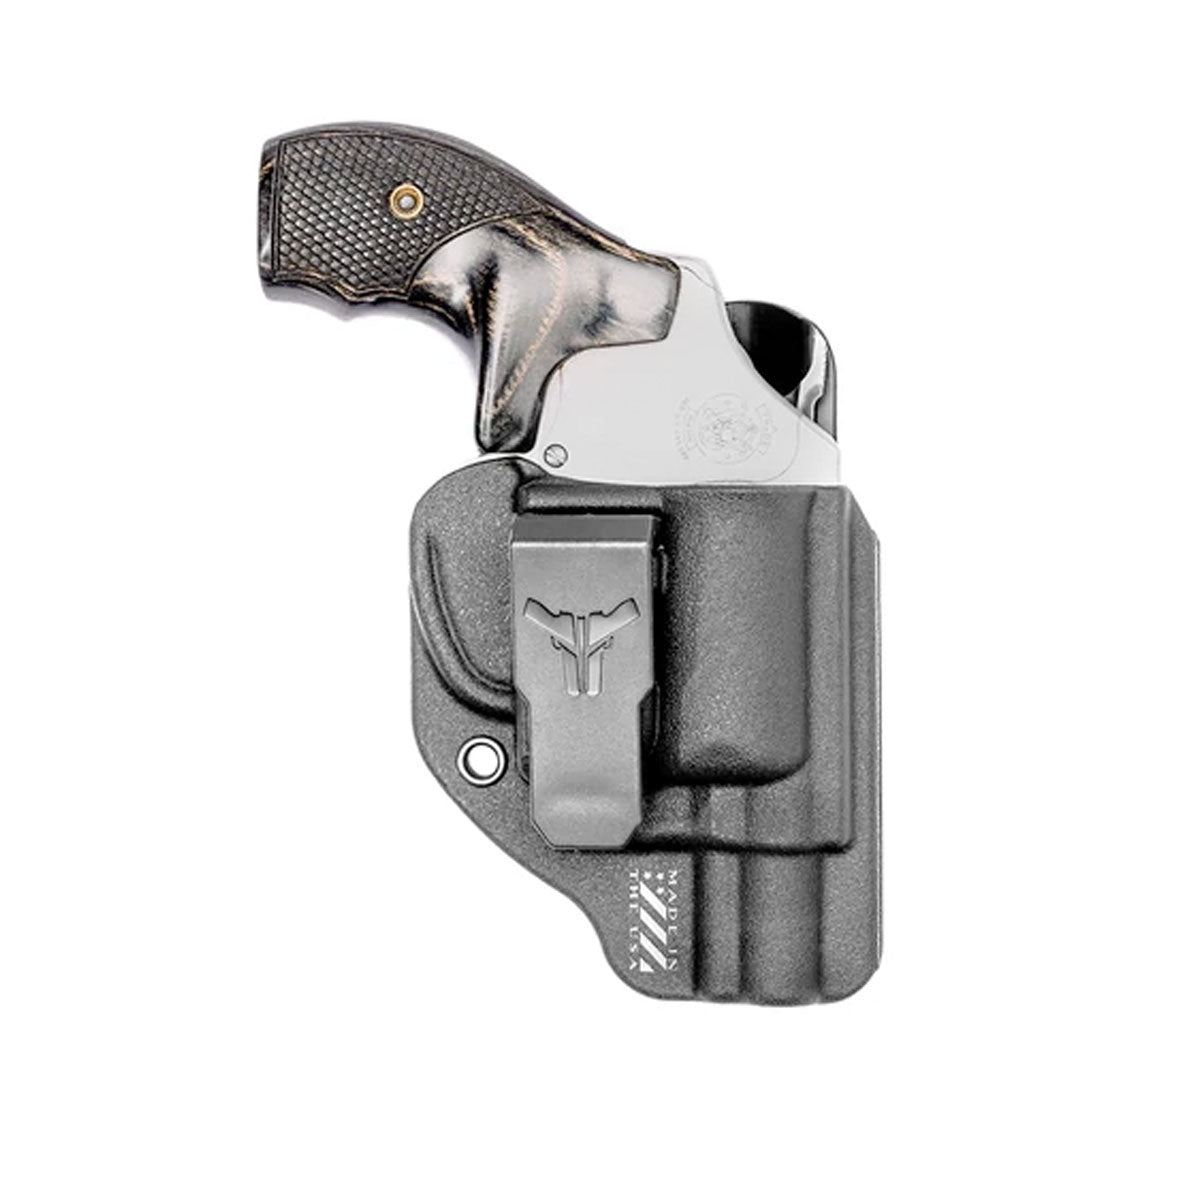 Blade-Tech Klipt IWB Holster Black Right Hand Only Holsters Blade-Tech Holsters S&W 442/642 J-Frame Tactical Gear Supplier Tactical Distributors Australia